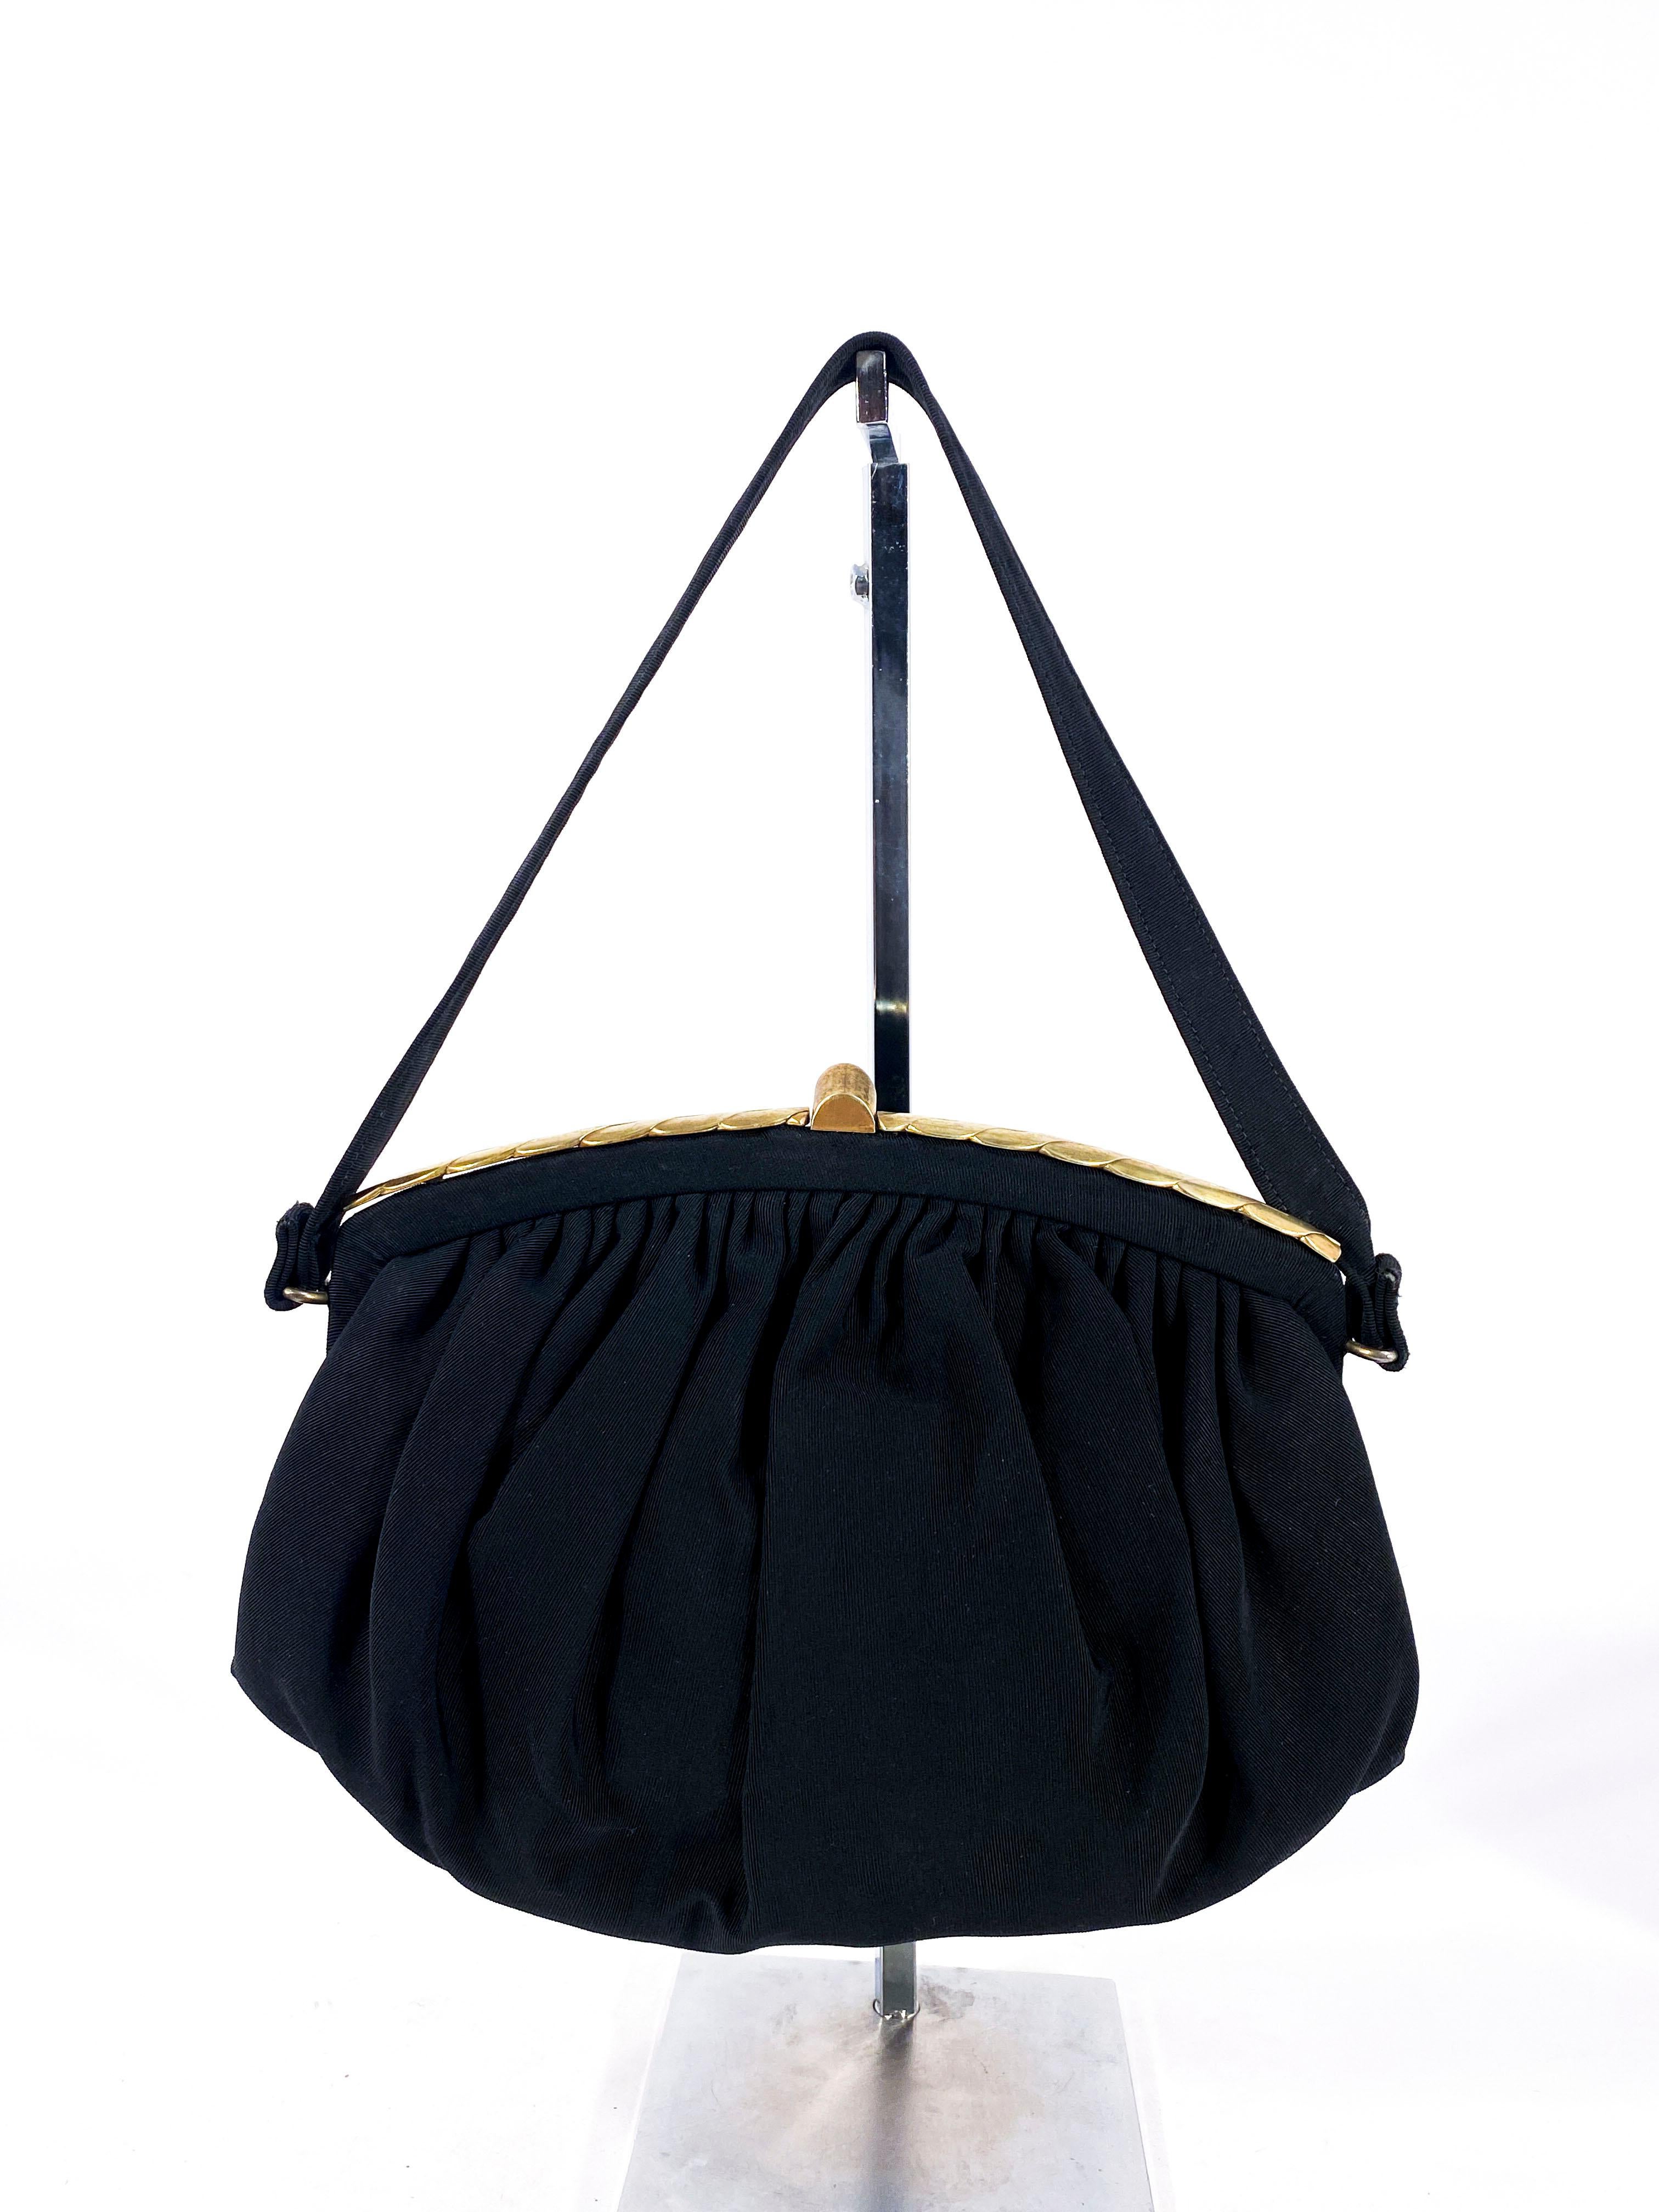 1940s Black twill purse with a decorative brass closure, gathered body toped with decorative frame. The interior of the purse is made of a black lining with several pocket and one of them with a zip closure. 